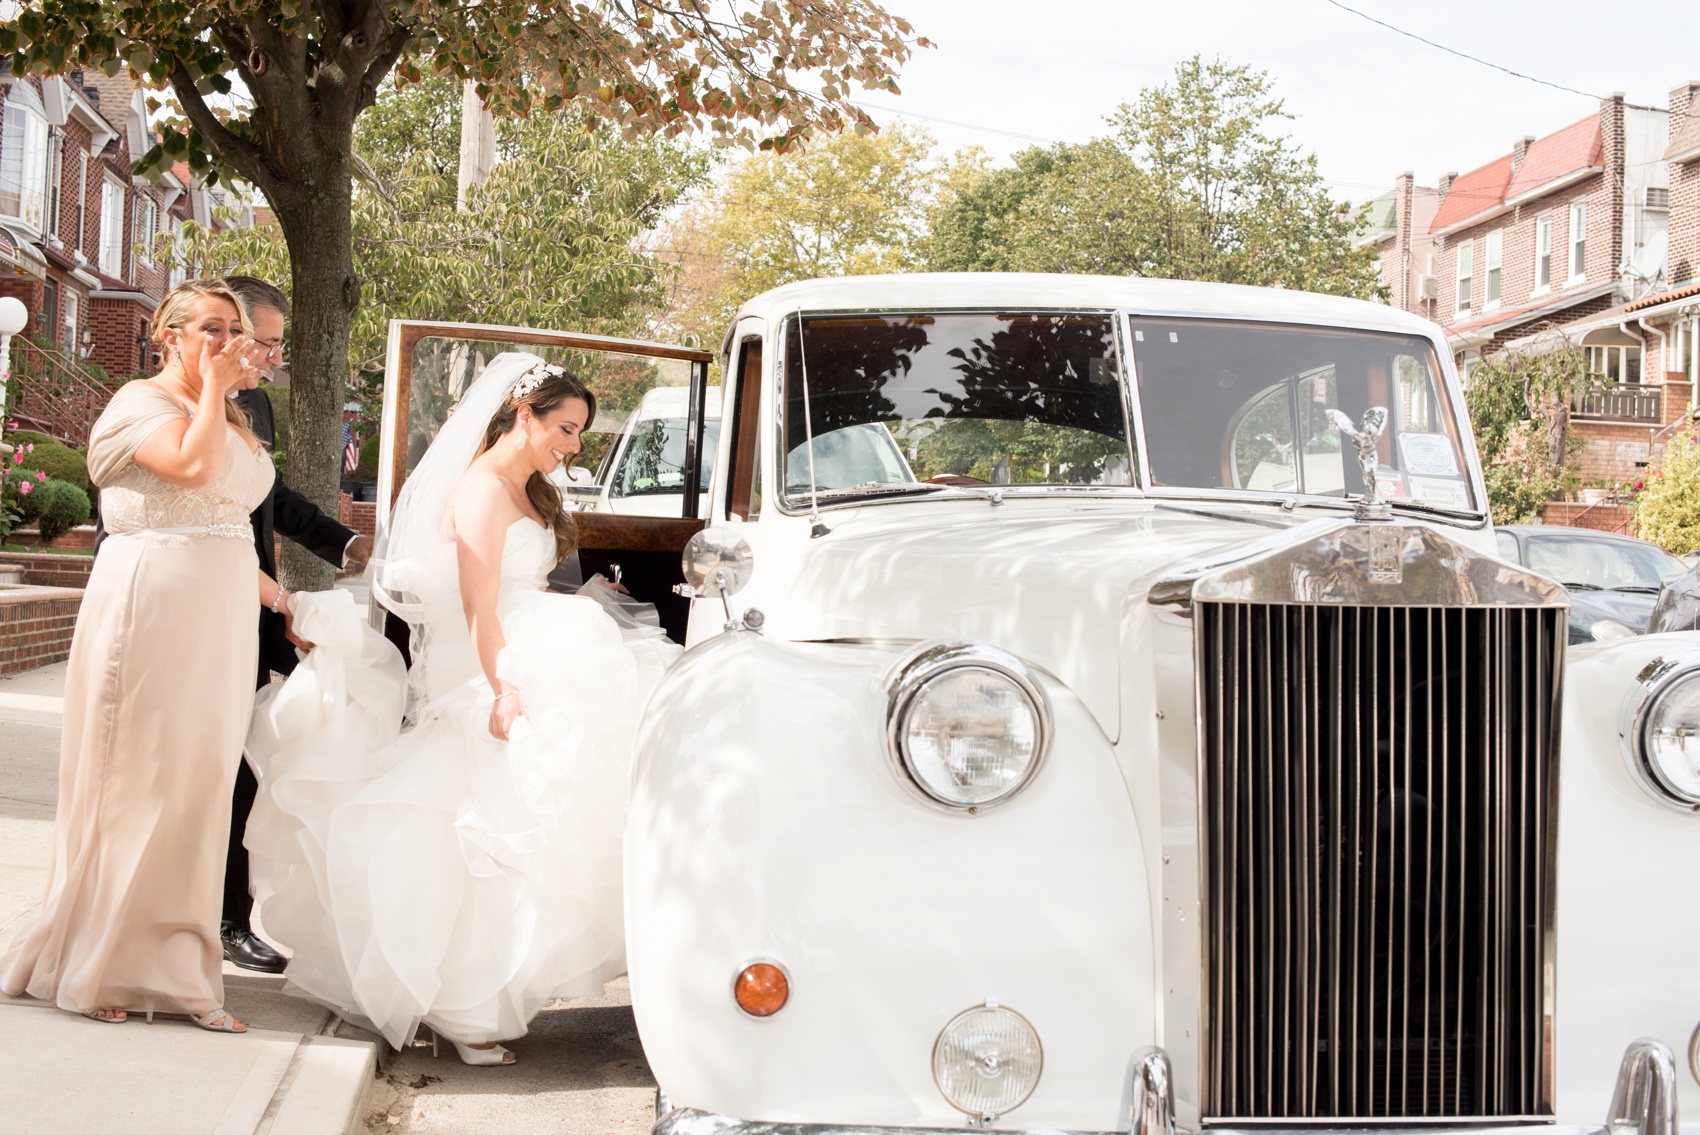 Colorful wedding photos by Mikkel Paige Photography, NYC wedding photographer. Planning by Dulce Dreams Events. Vintage Rolls Royce car for the bride.